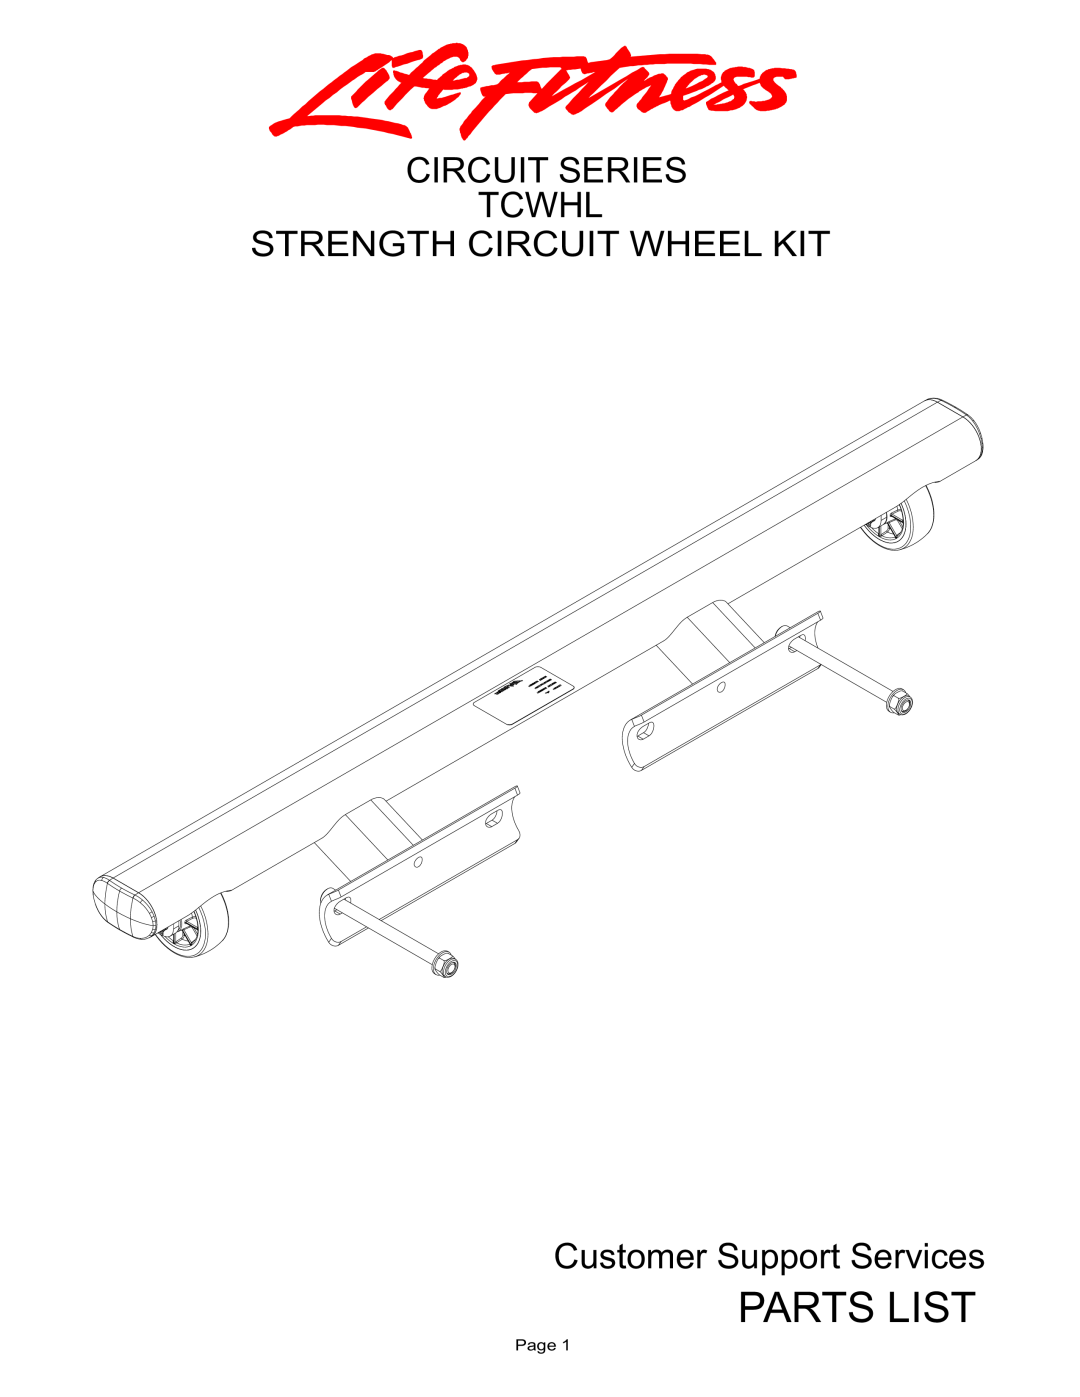 Life Fitness TCWHL manual Parts List, Circuit Series Tcwhl Strength Circuit Wheel Kit, Customer Support Services, Page 